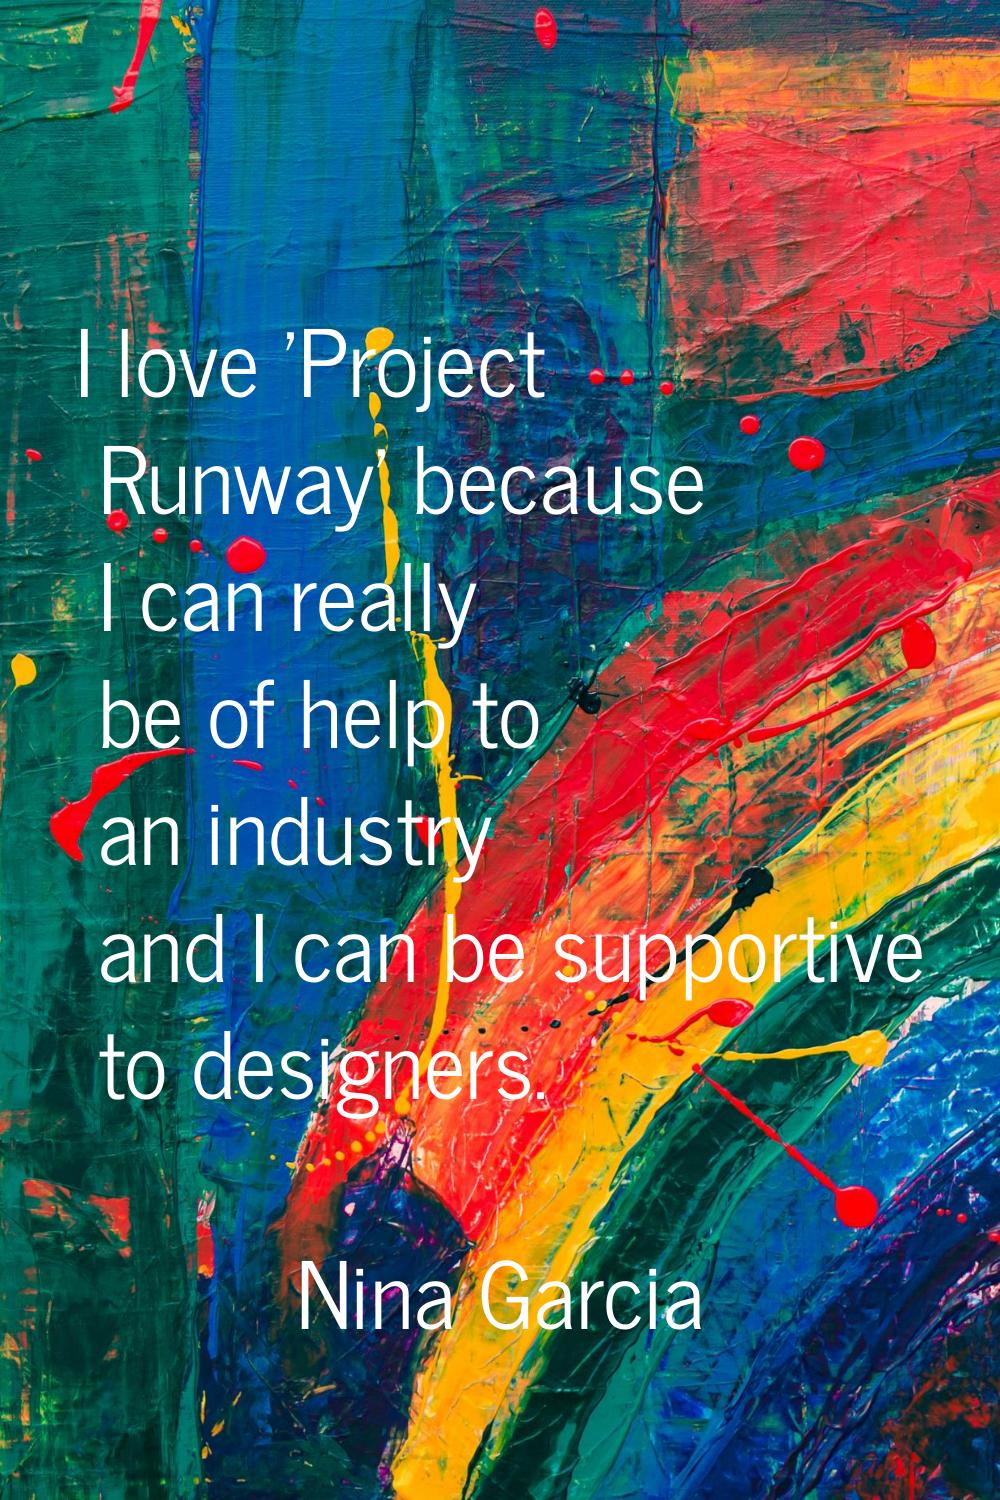 I love 'Project Runway' because I can really be of help to an industry and I can be supportive to d